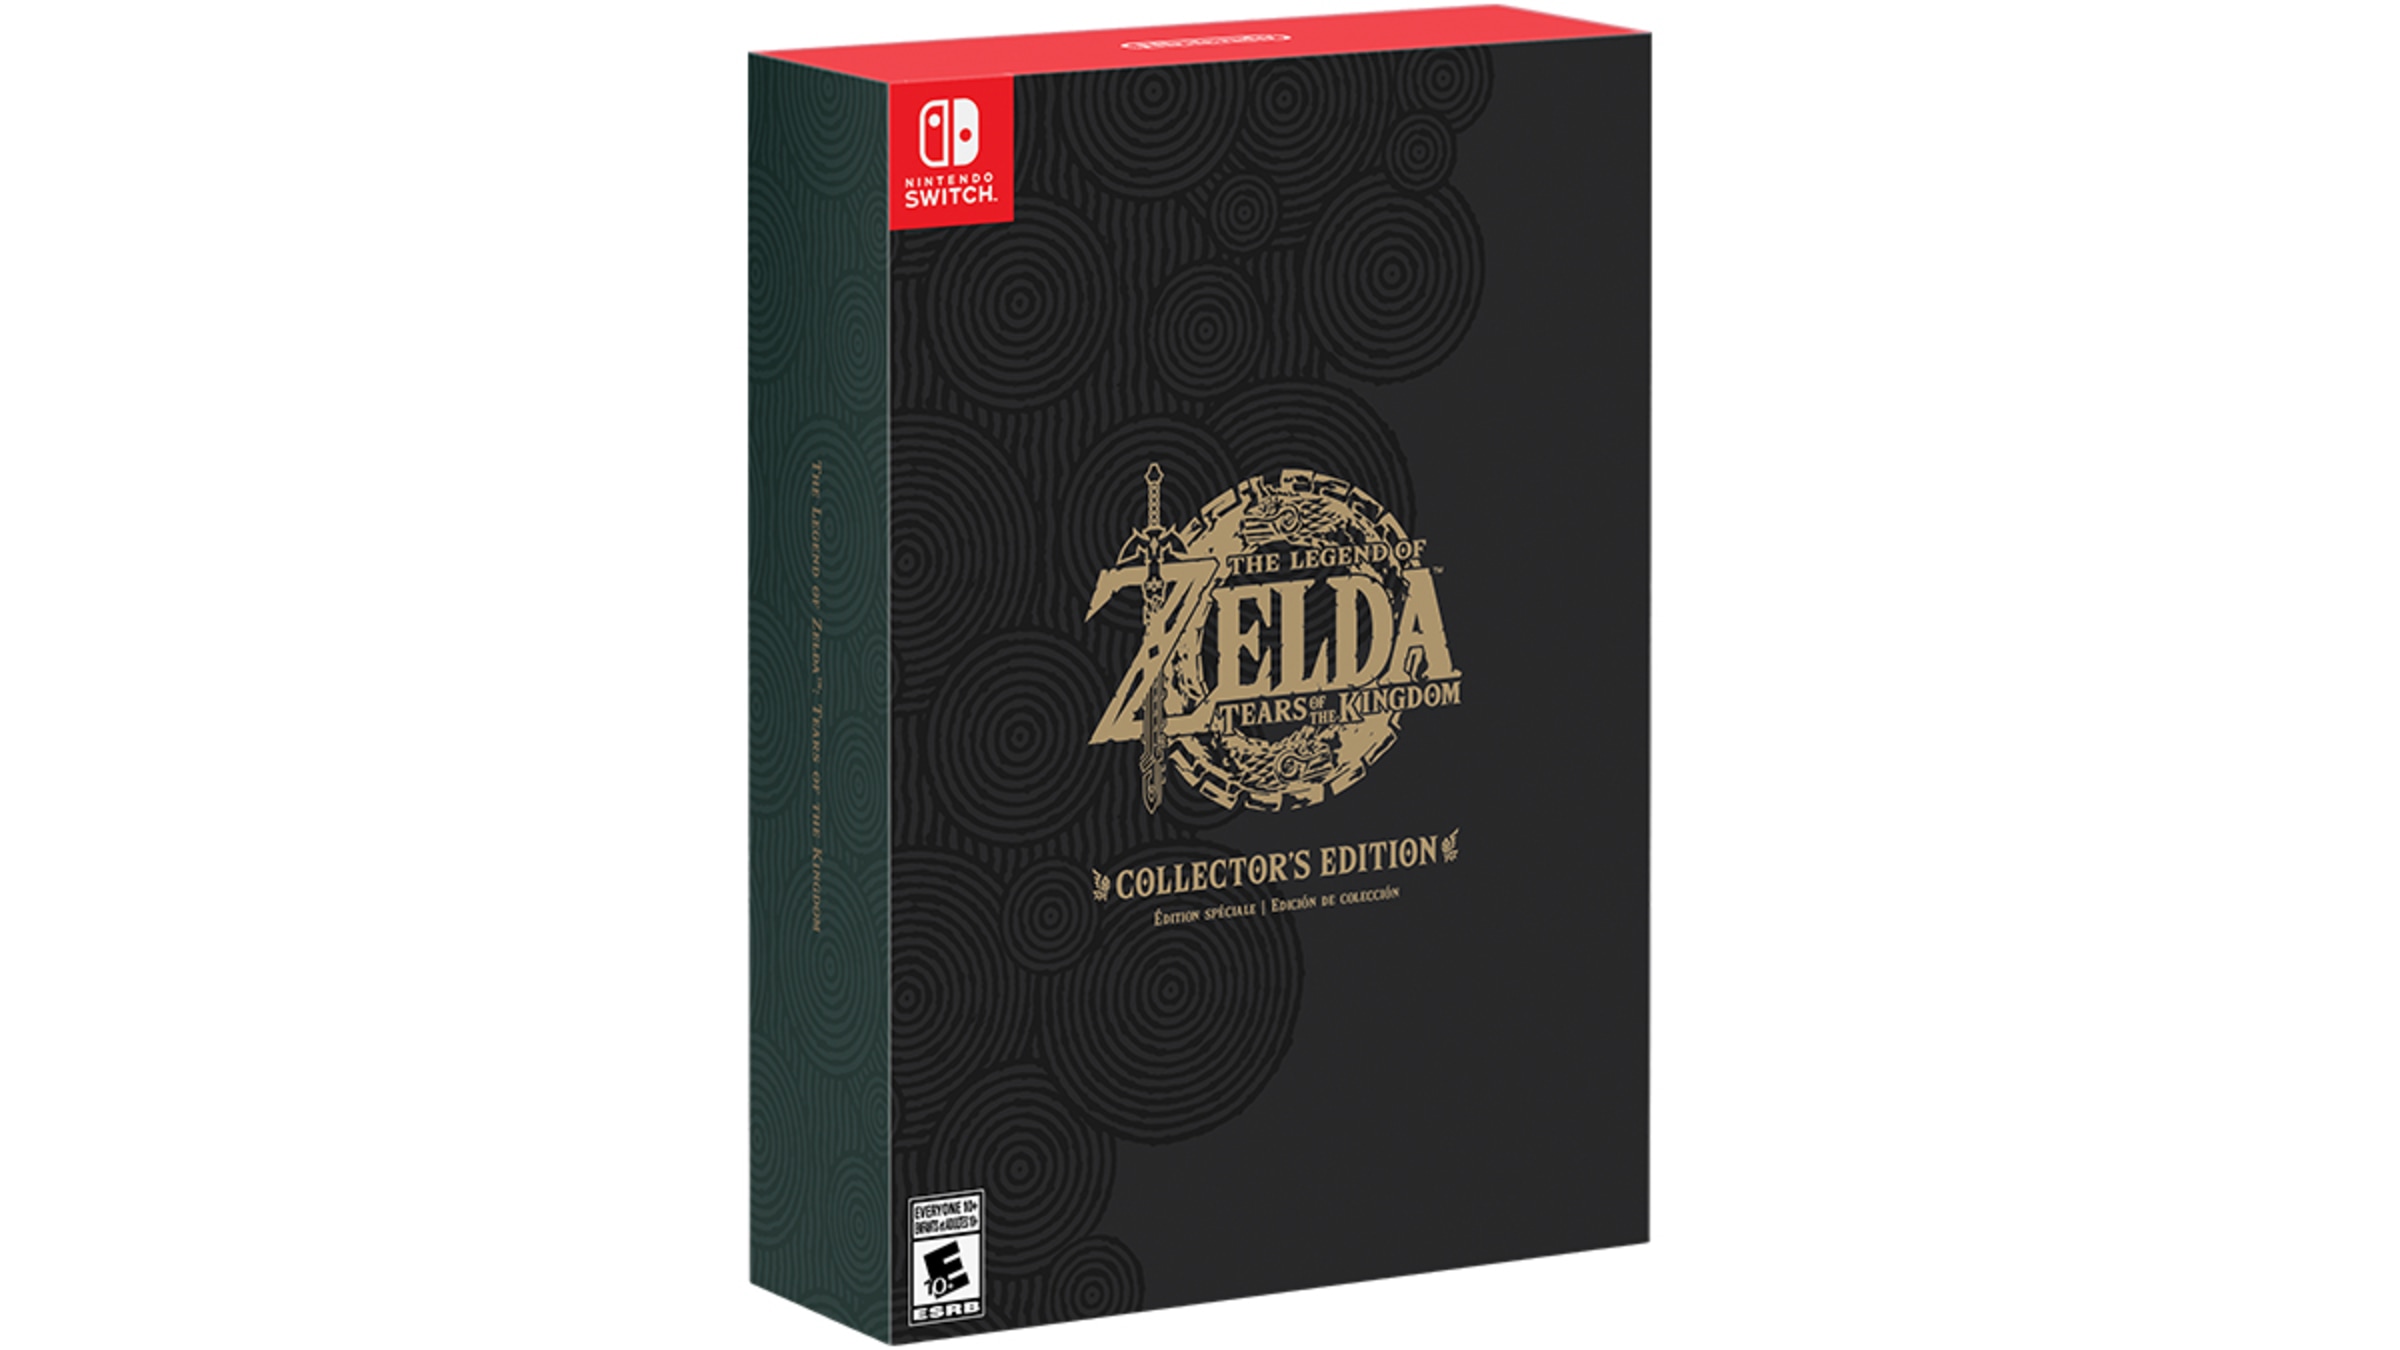 The Legend of Zelda™: Tears of the Kingdom Collector's Edition